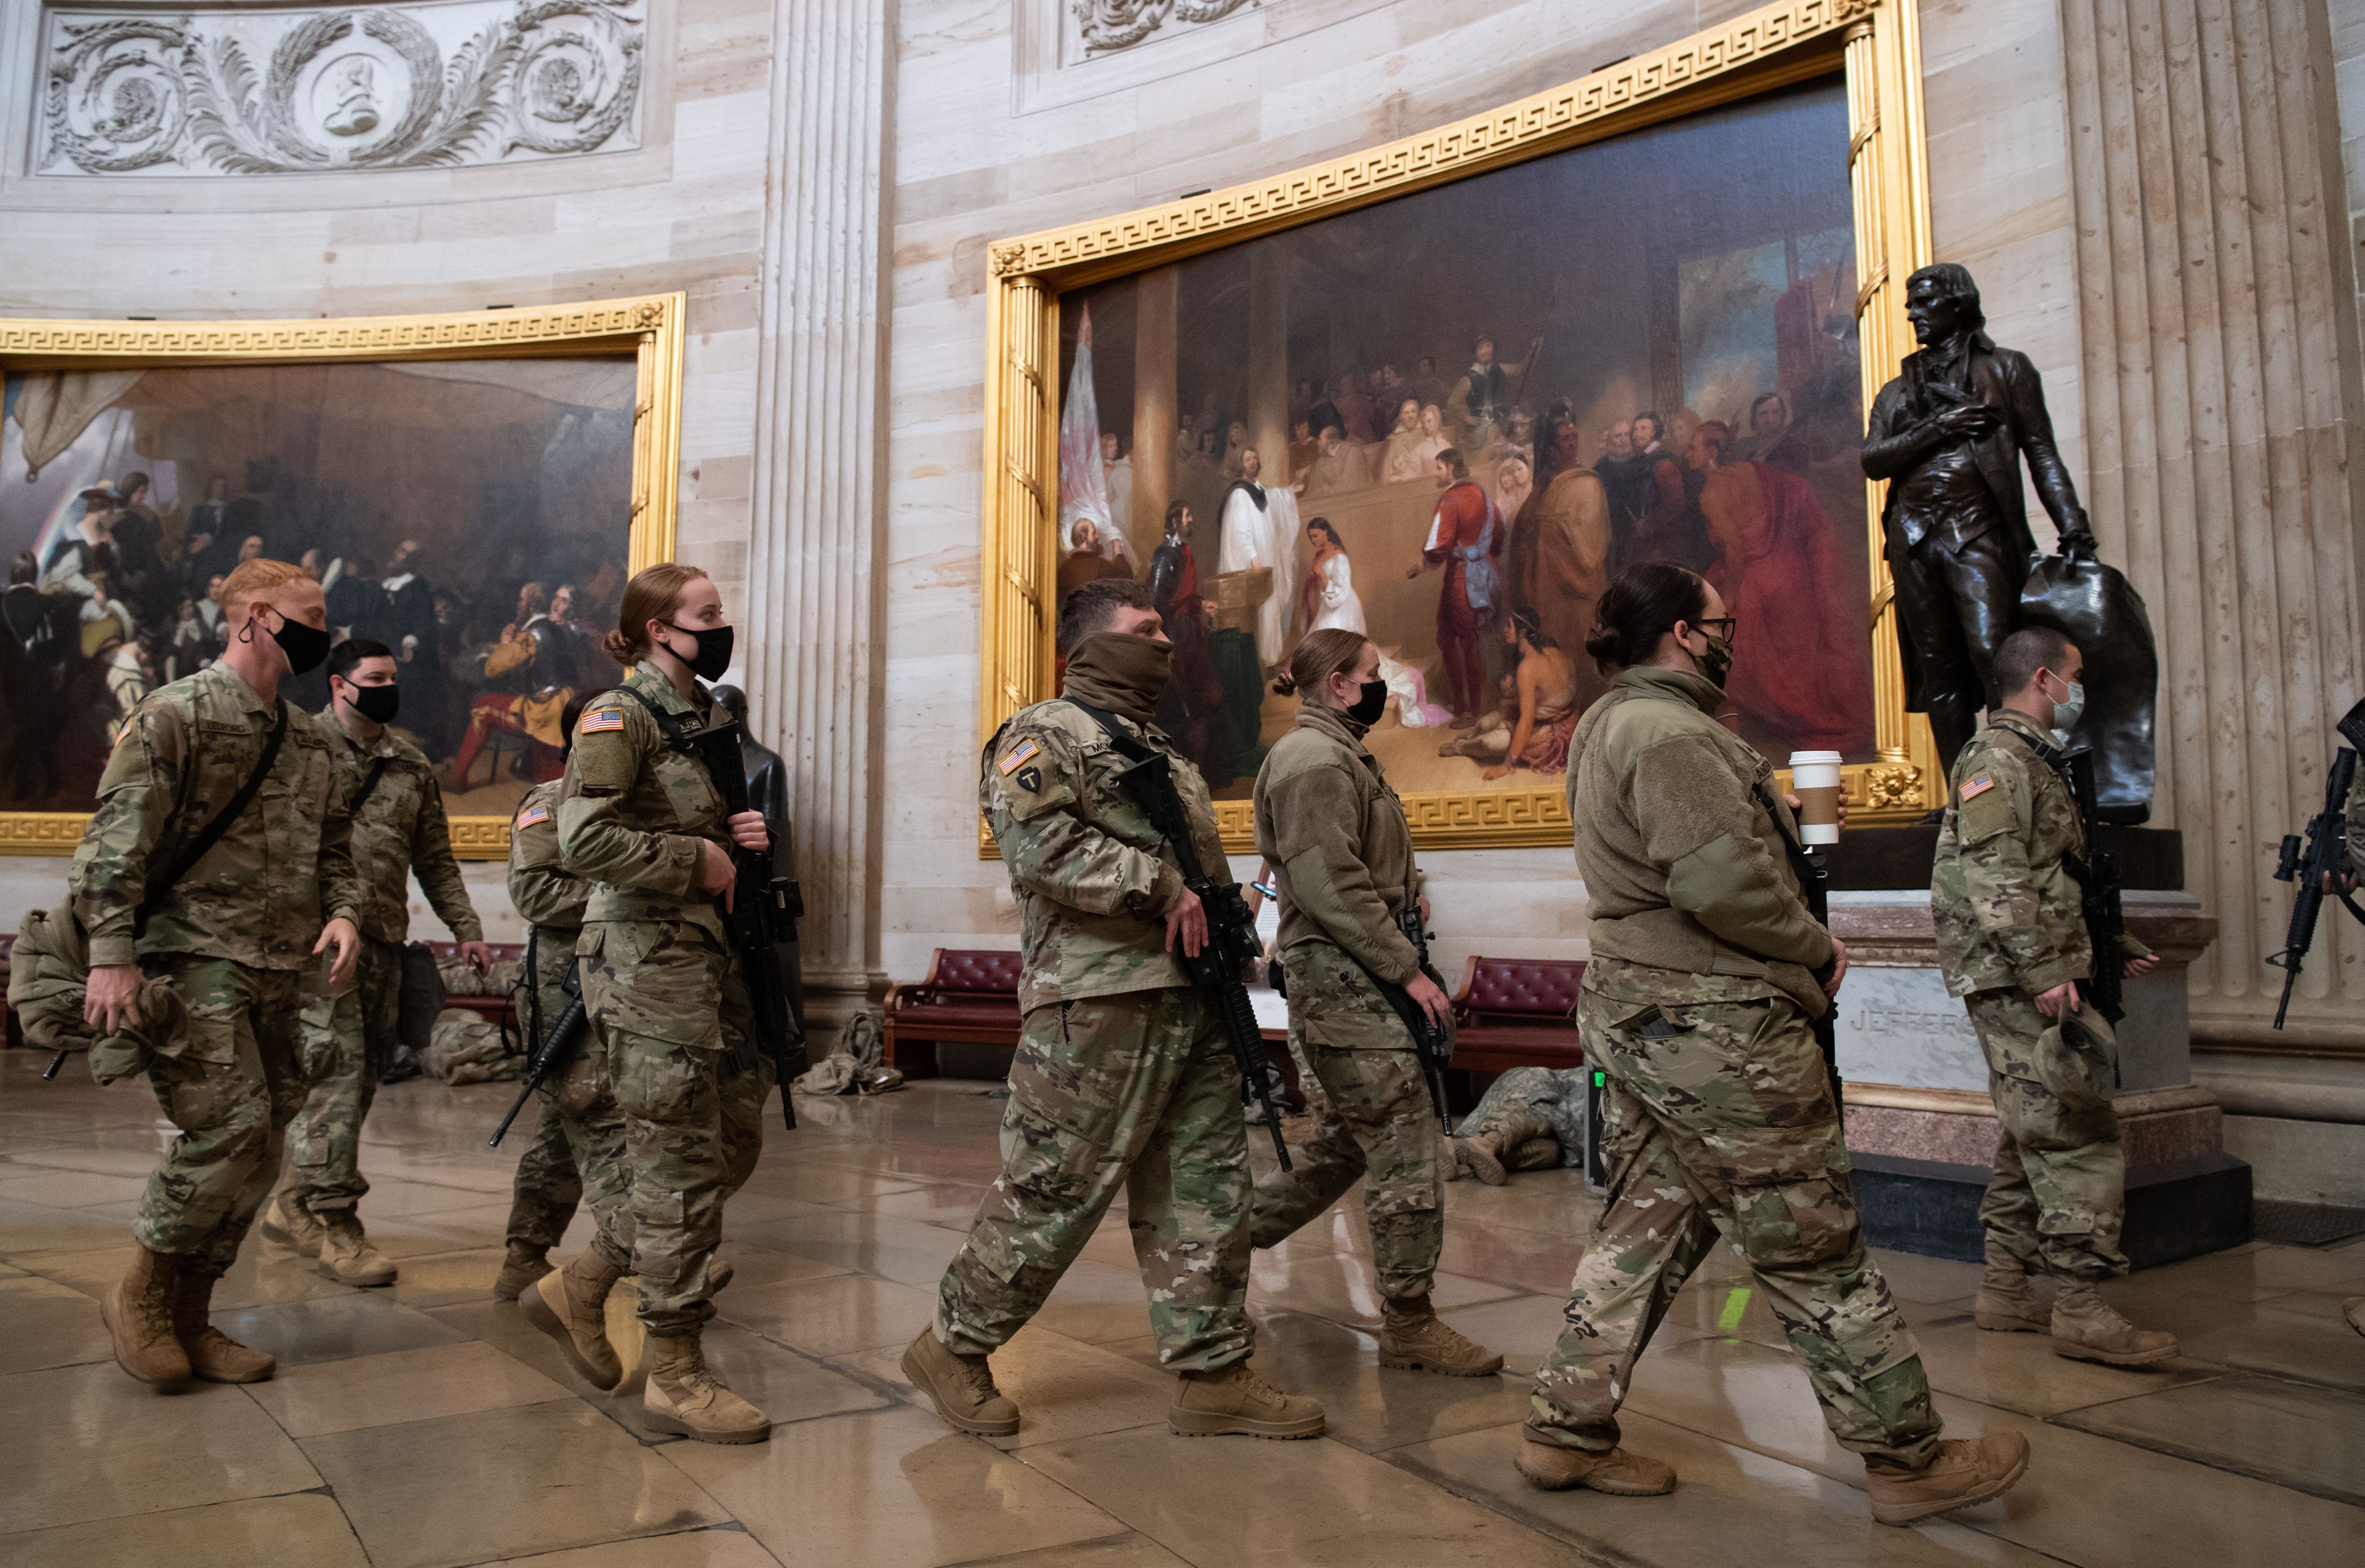 Members of the National Guard walk through the Rotunda of the US Capitol